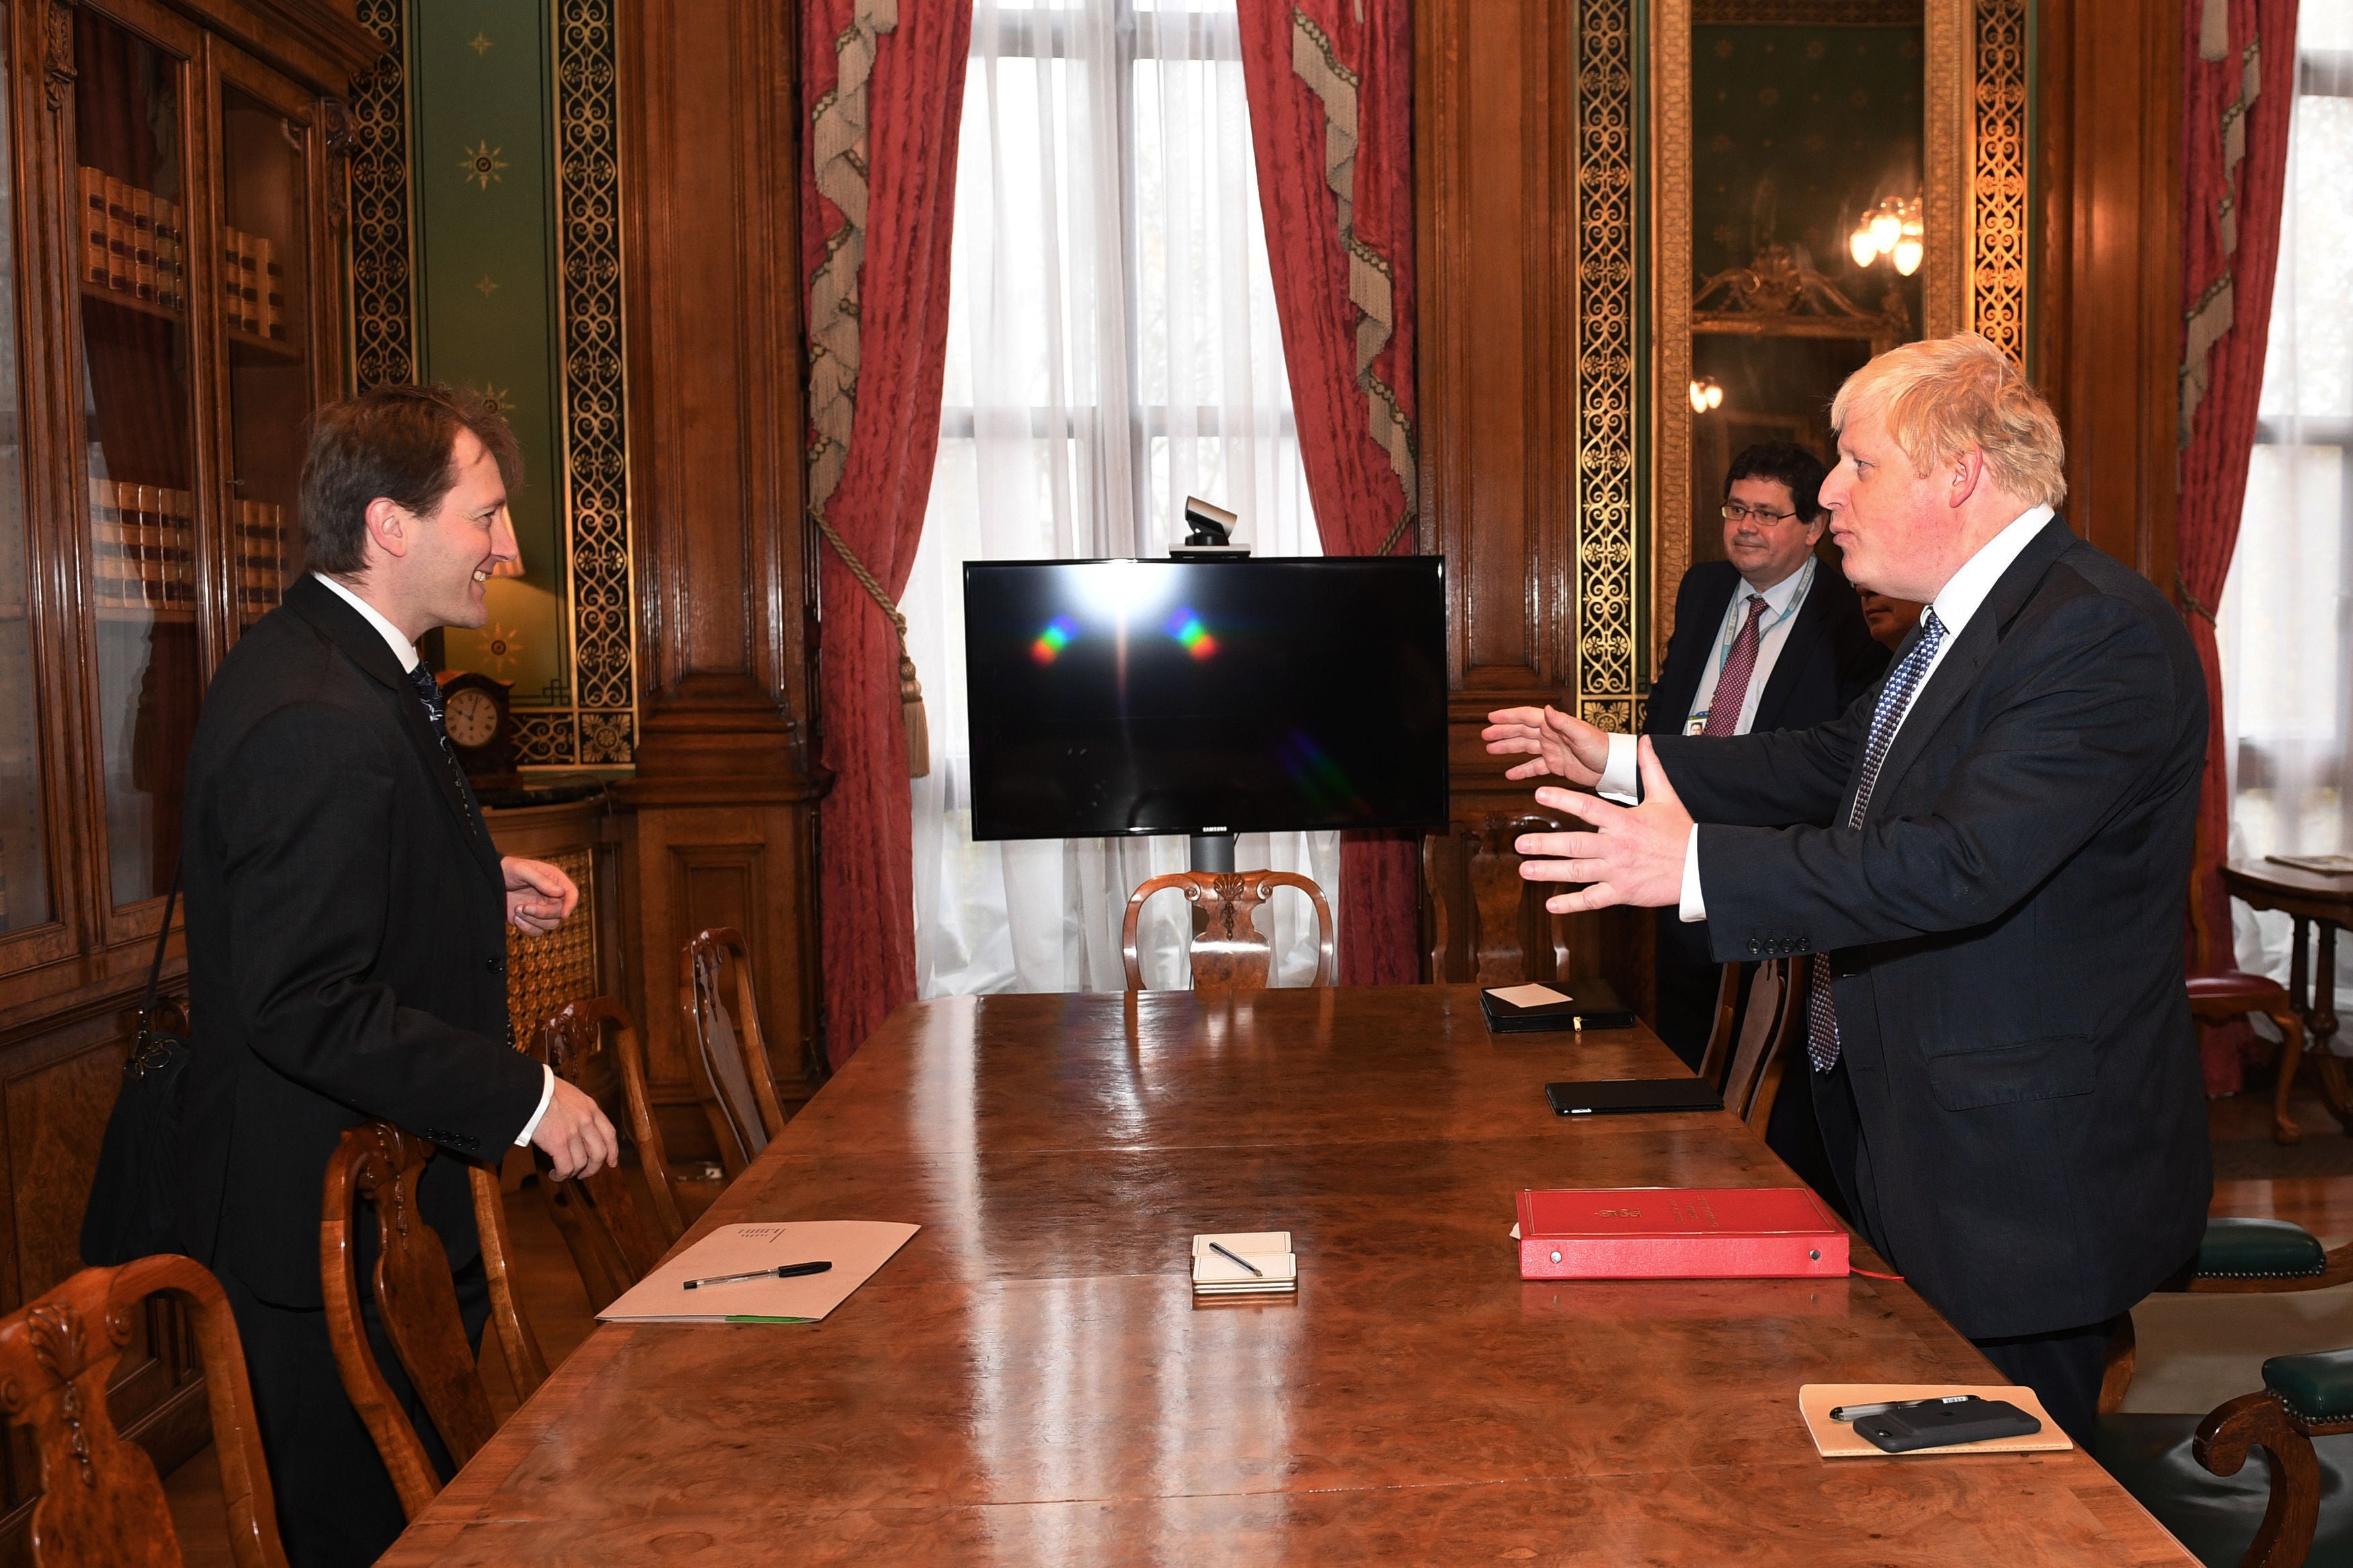 Richard Ratcliffe meeting with then-foreign secretary Boris Johnson in 2017